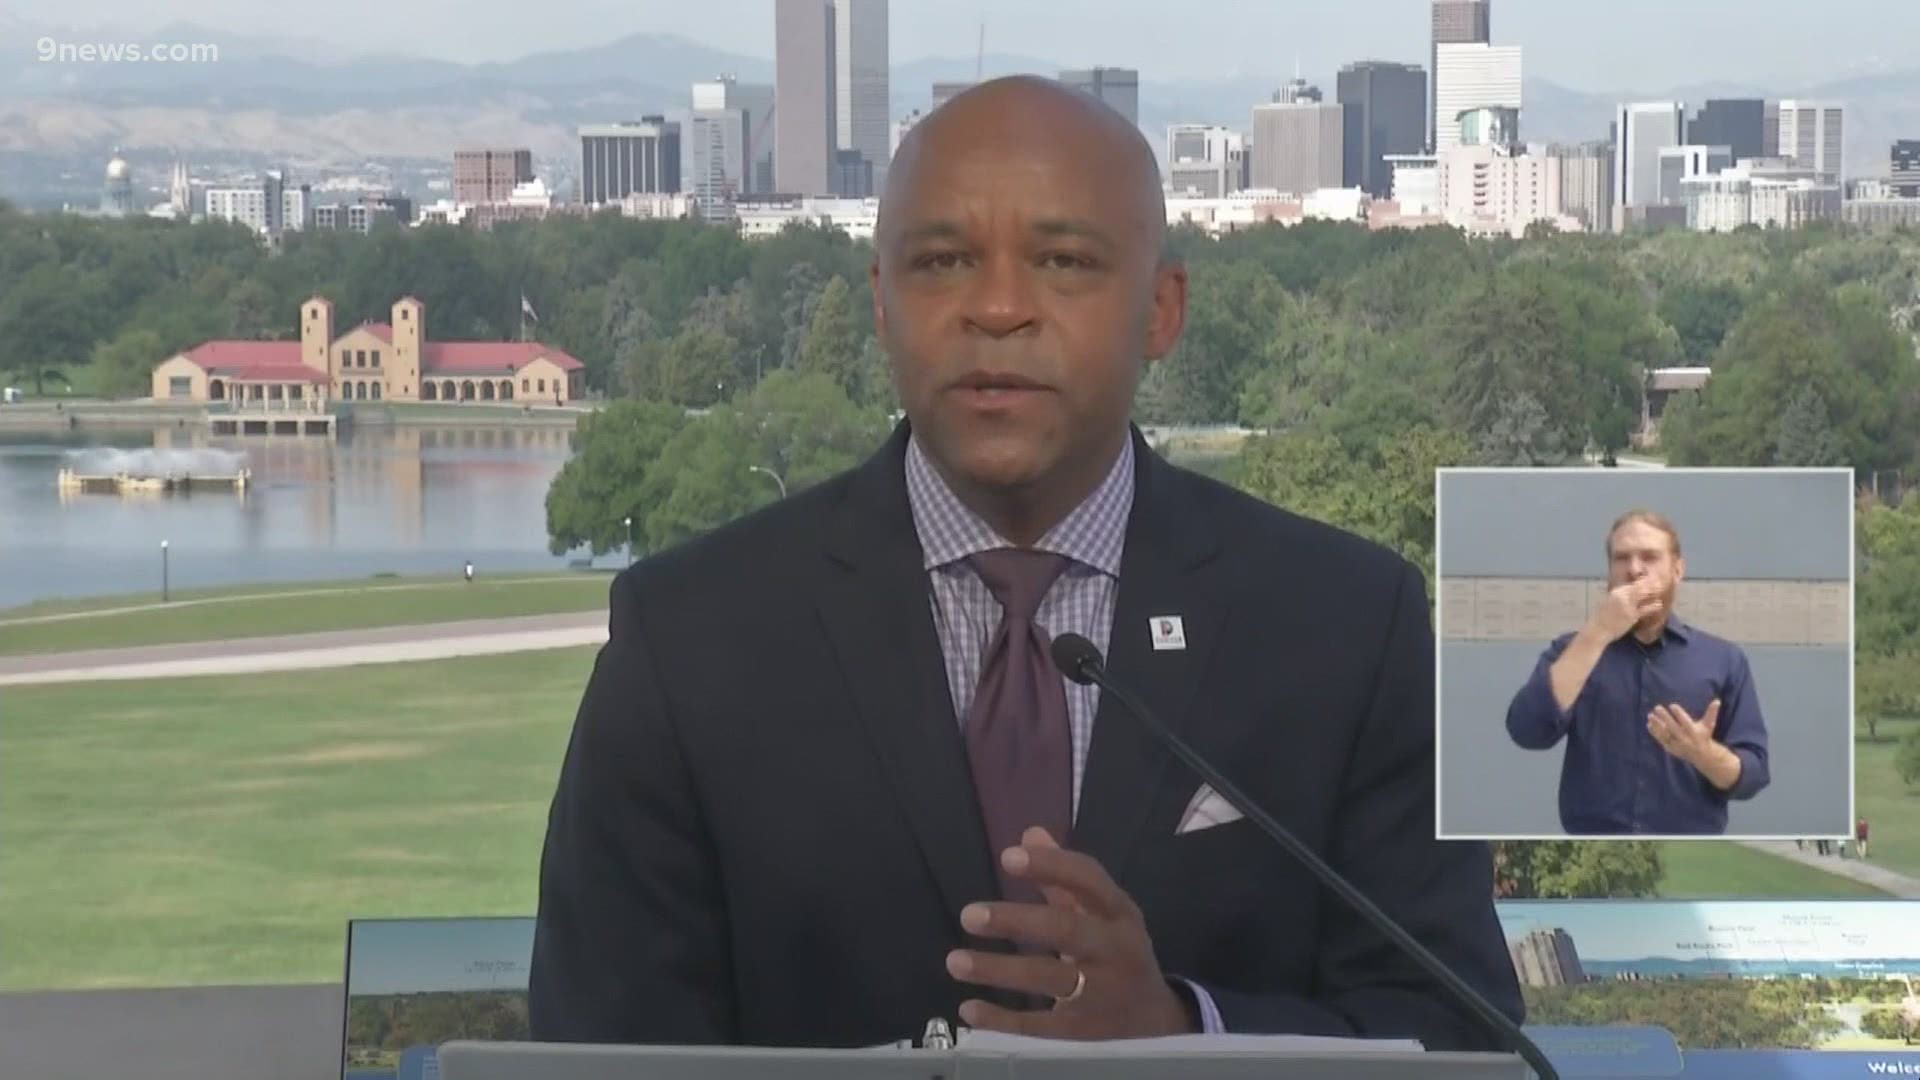 The Denver mayor emphasized social responsibility amid the COVID-19 pandemic and announced his plan to establish a city institute to address racism.